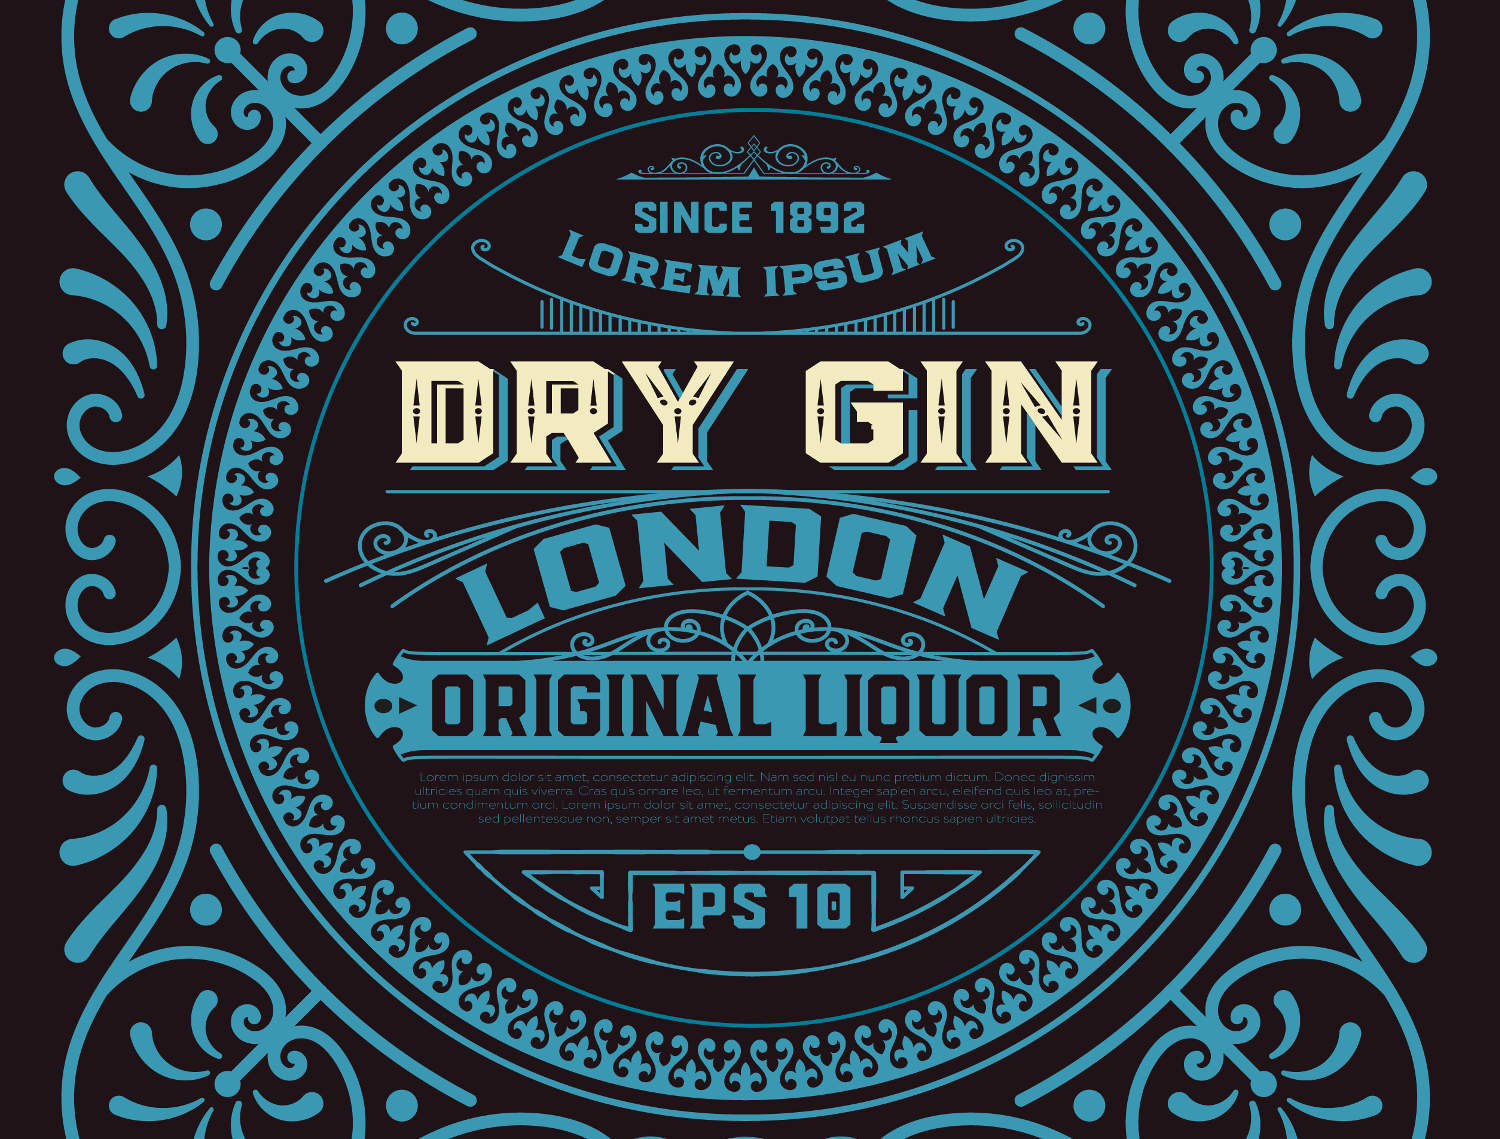 A brief history of gin and how it conquered the world